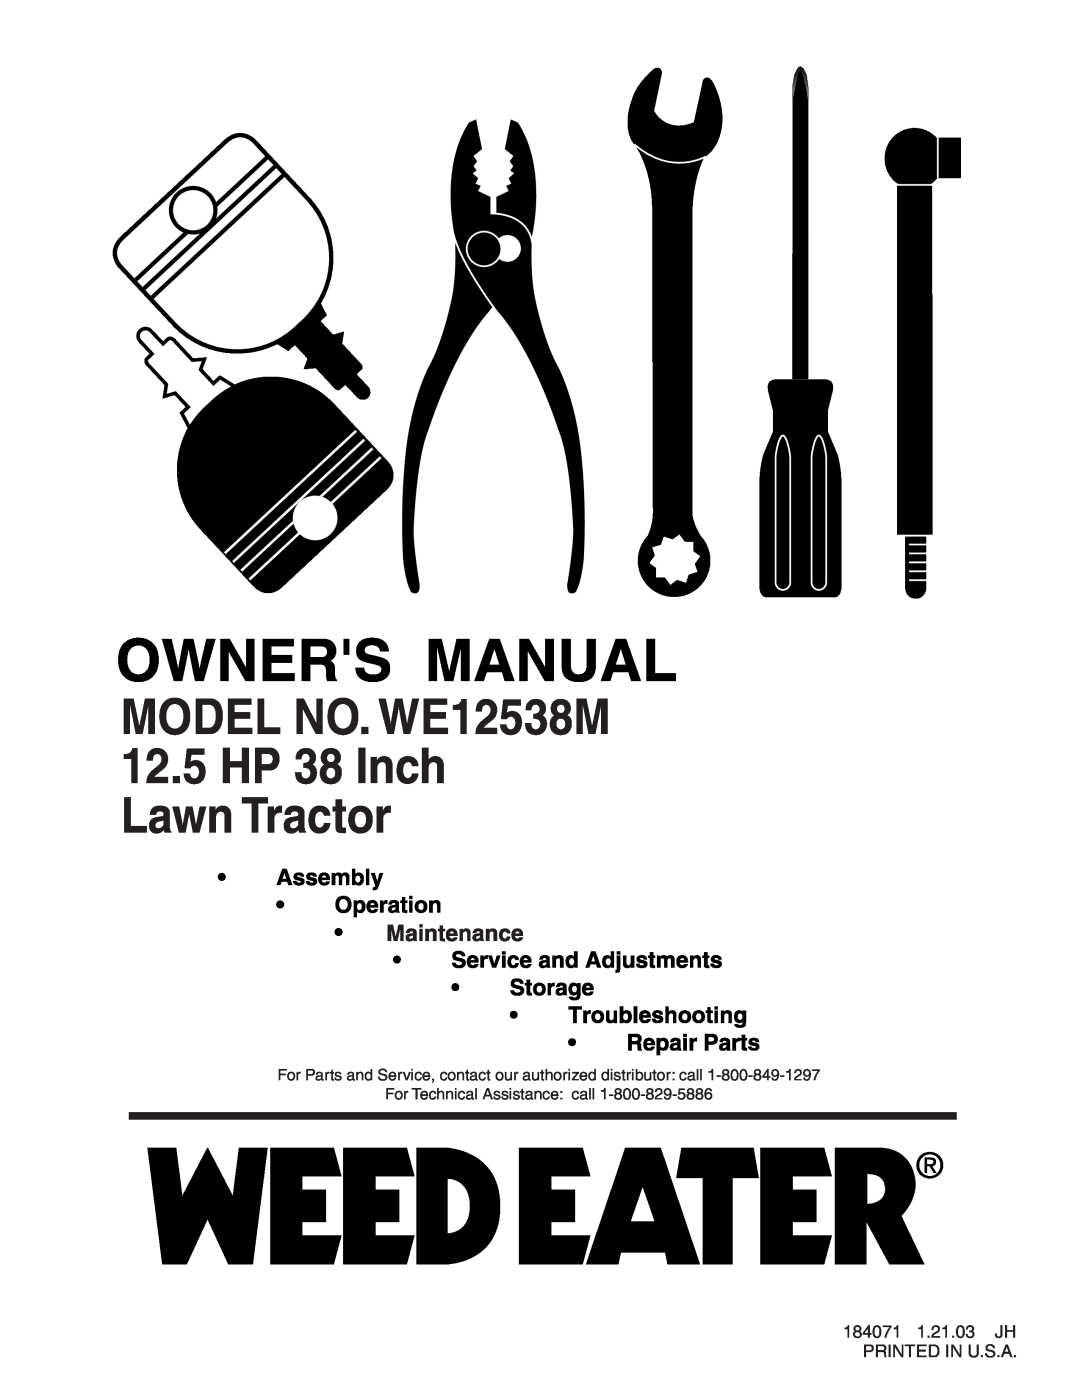 Weed Eater manual MODEL NO. WE12538M 12.5 HP 38 Inch Lawn Tractor, 184071 1.21.03 JH PRINTED IN U.S.A 